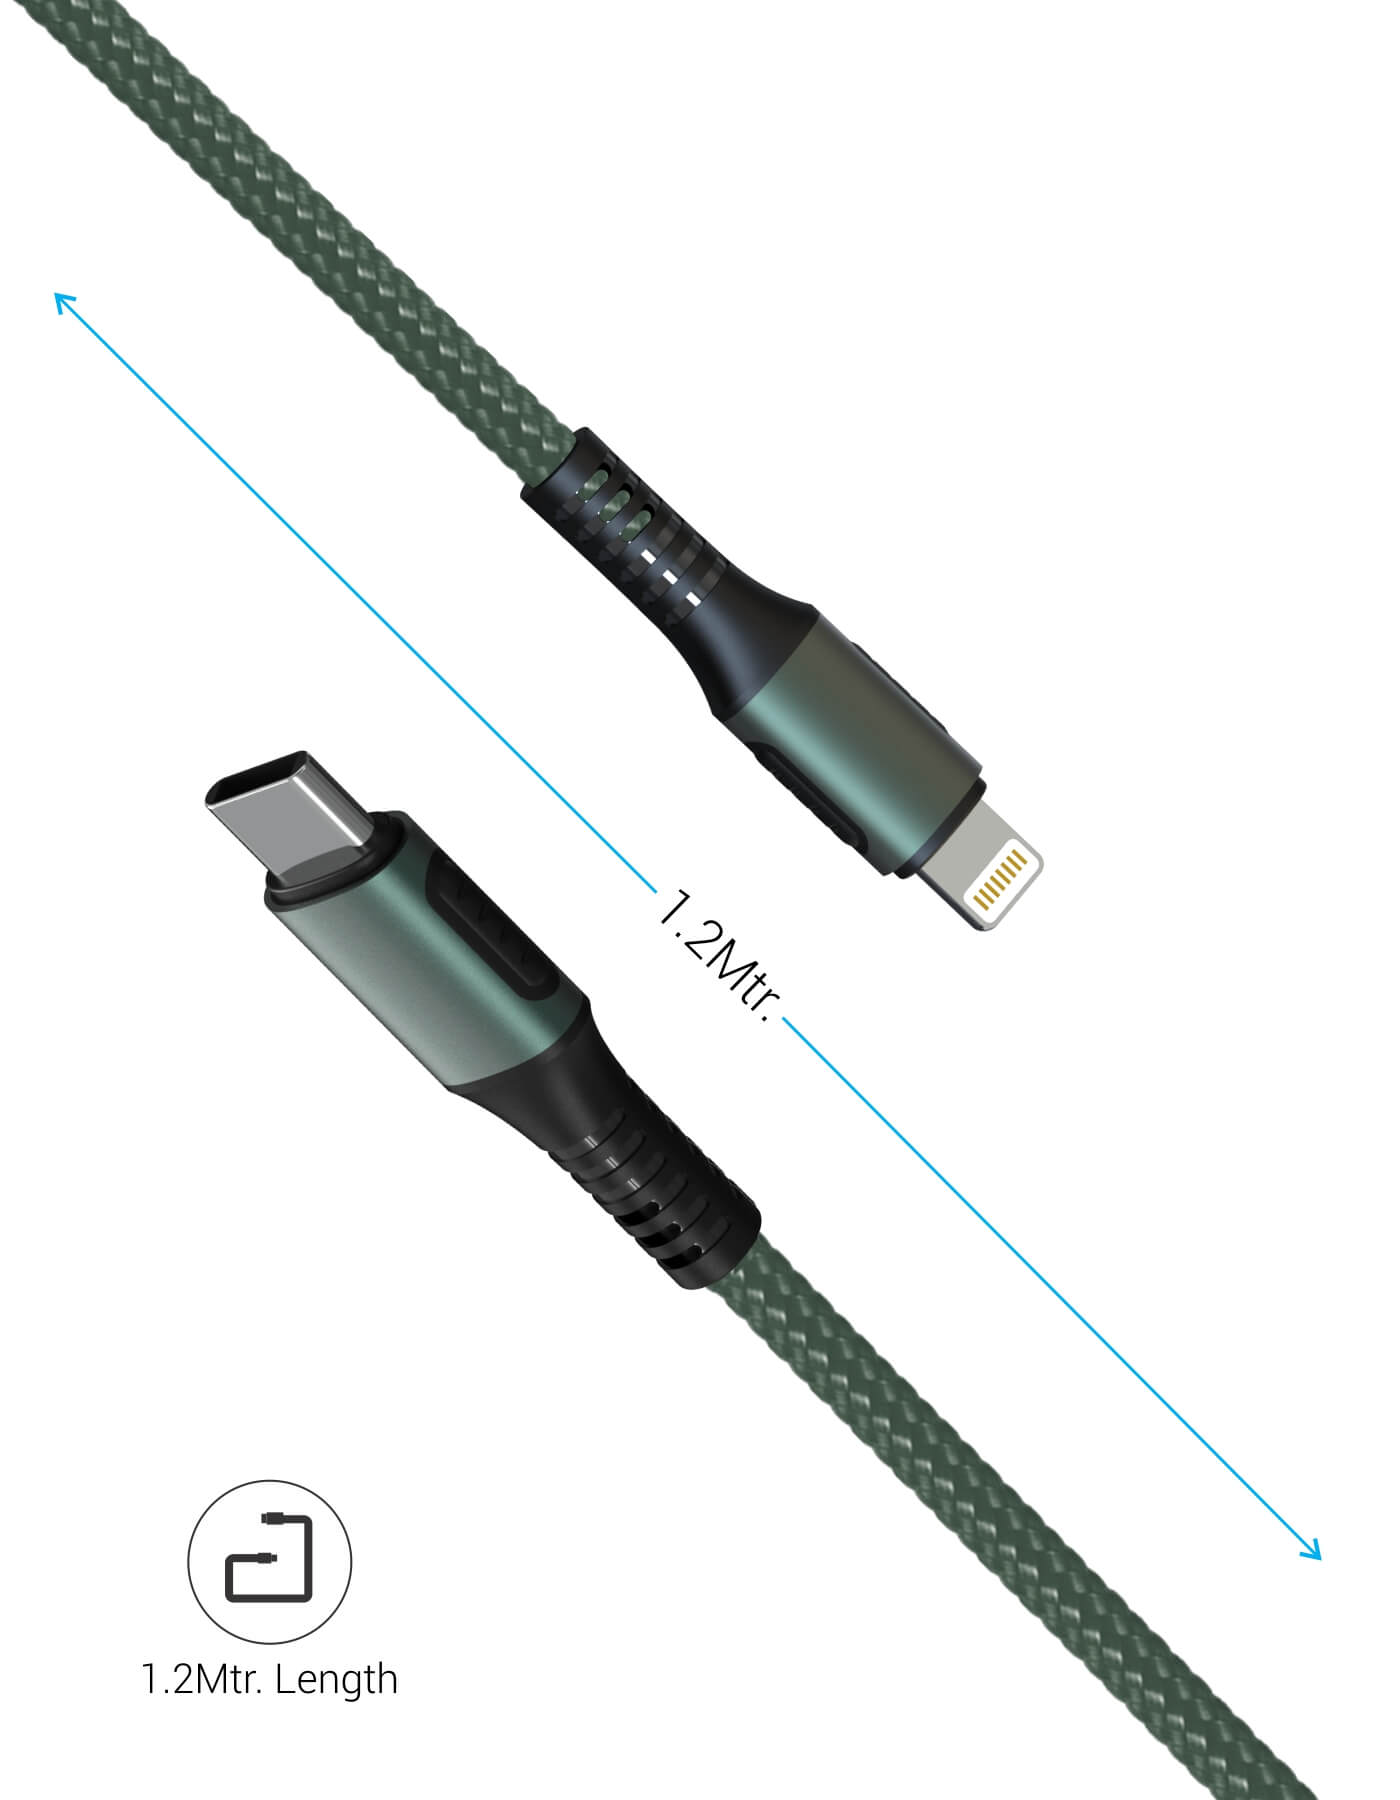 Portronics Konnect CL best 3A Type-C to 8 Pin USB Cable length of portronics konnect cl is 1.2 m